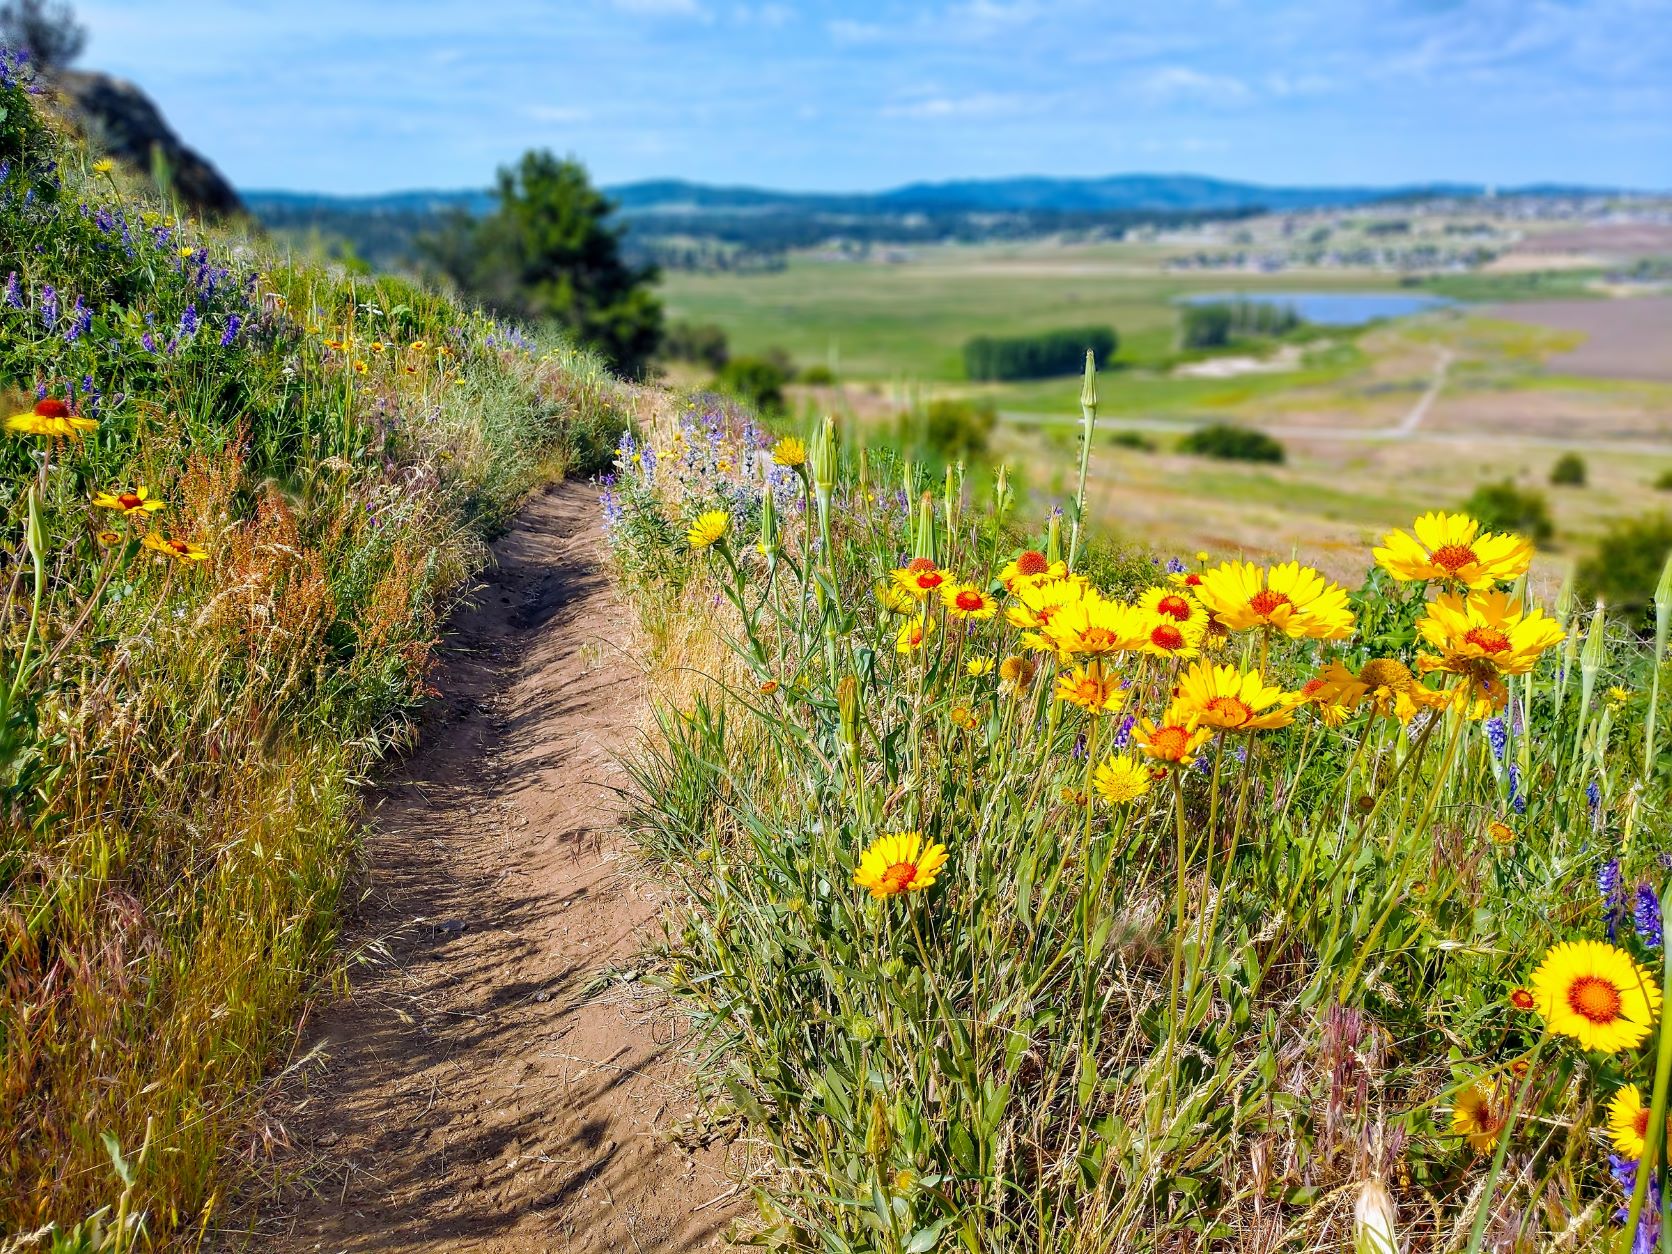 Dirt trail traversing a hillside, with yellow, orange, and purple wildflowers along the sides.